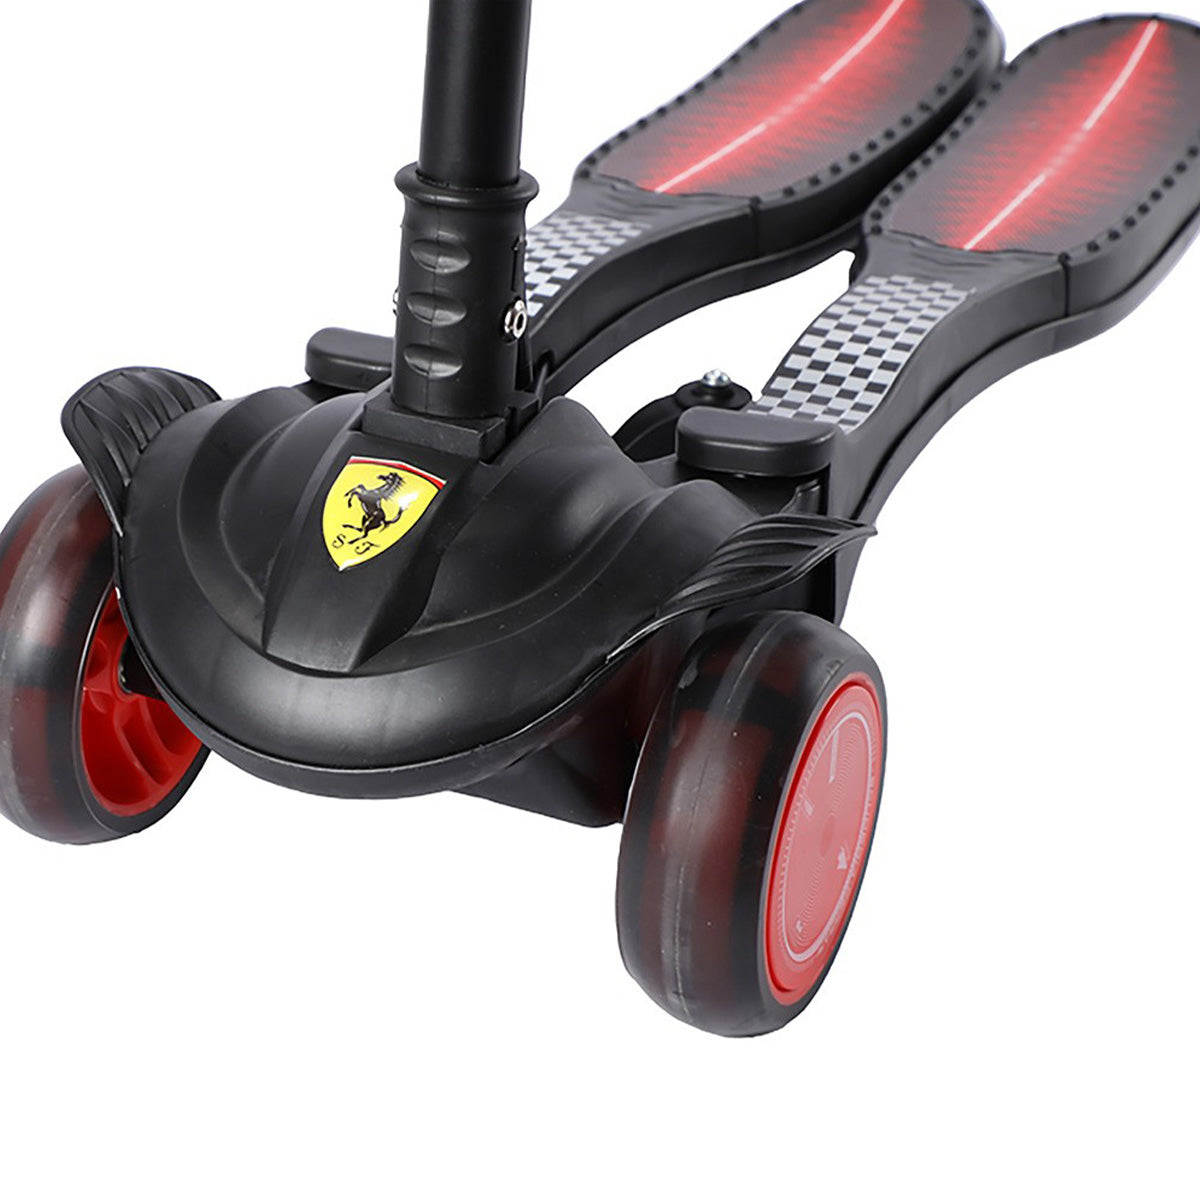 Ferrari - Frog Scooter For Kids With Adjustable Height (Black)